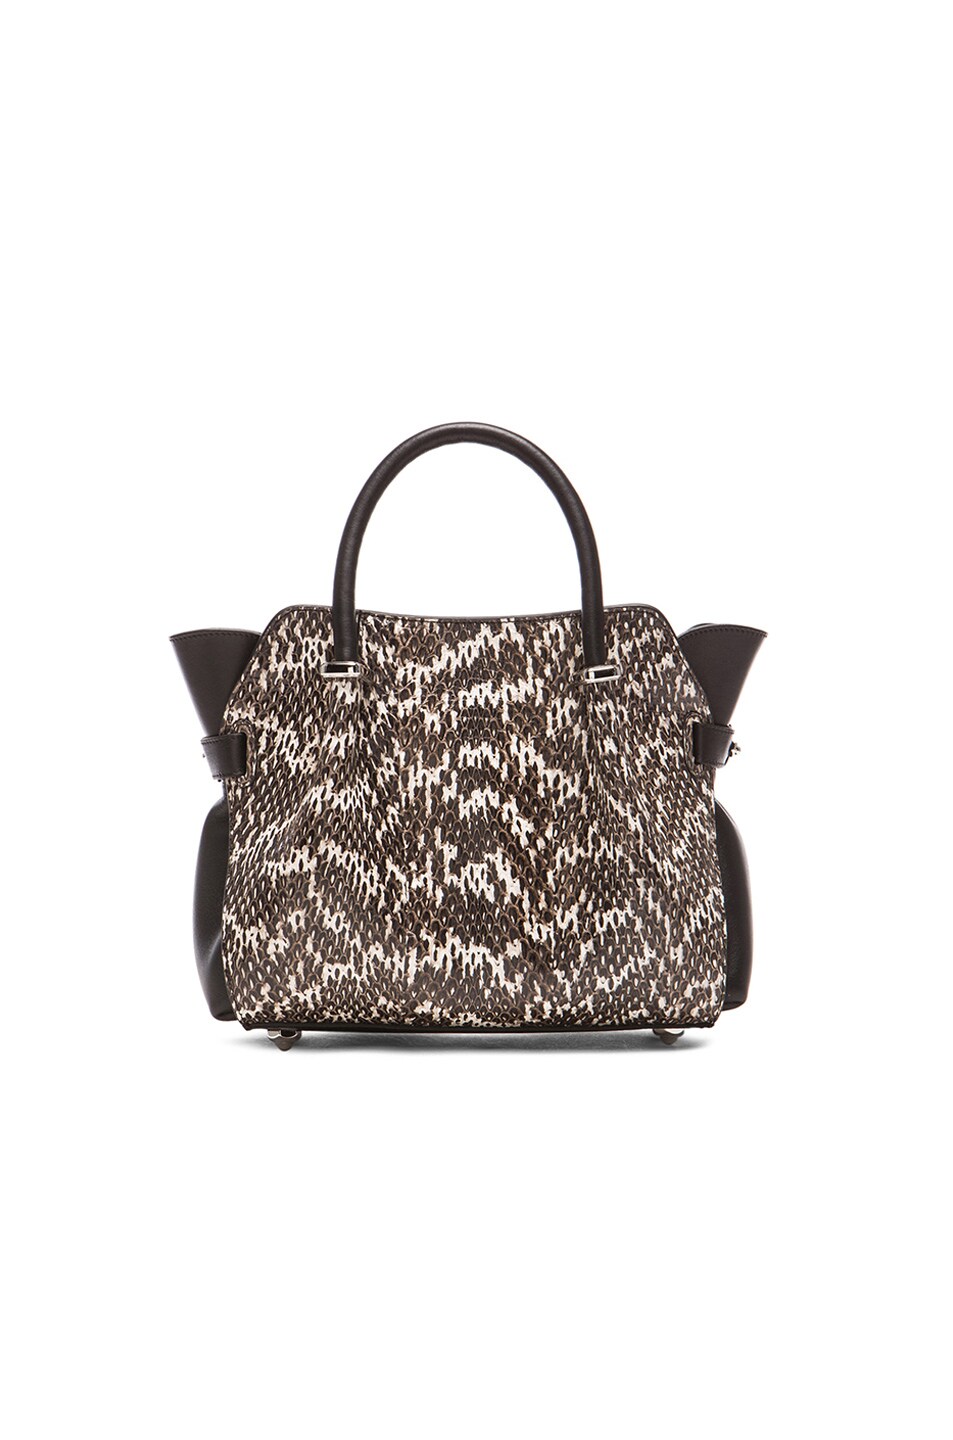 Image 1 of Nina Ricci Small Snake Marche Satchel in Noir & Blanc